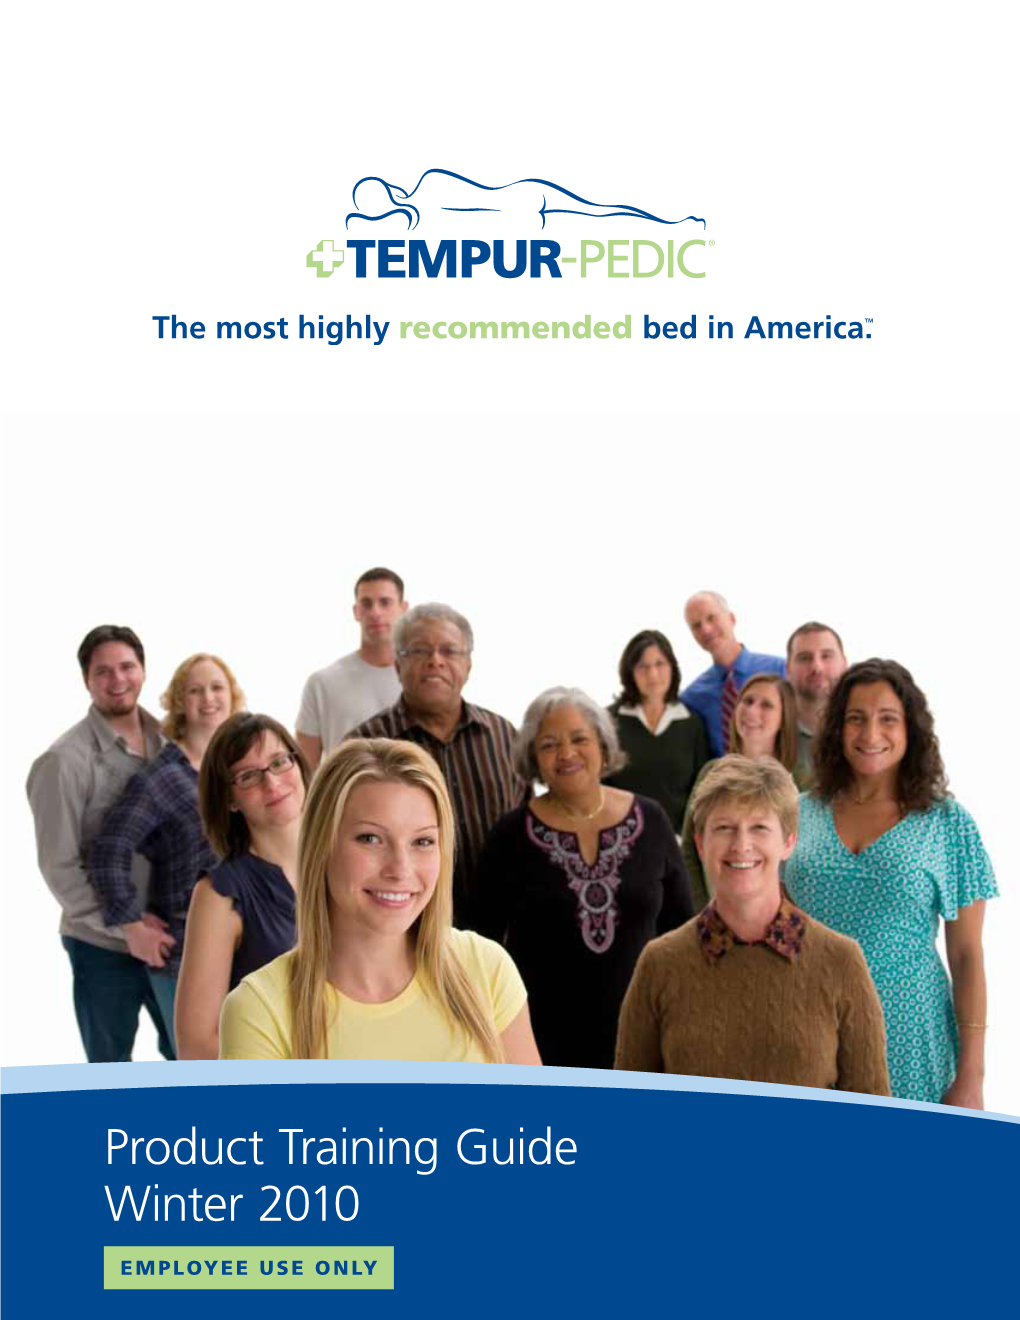 Product Training Guide Winter 2010